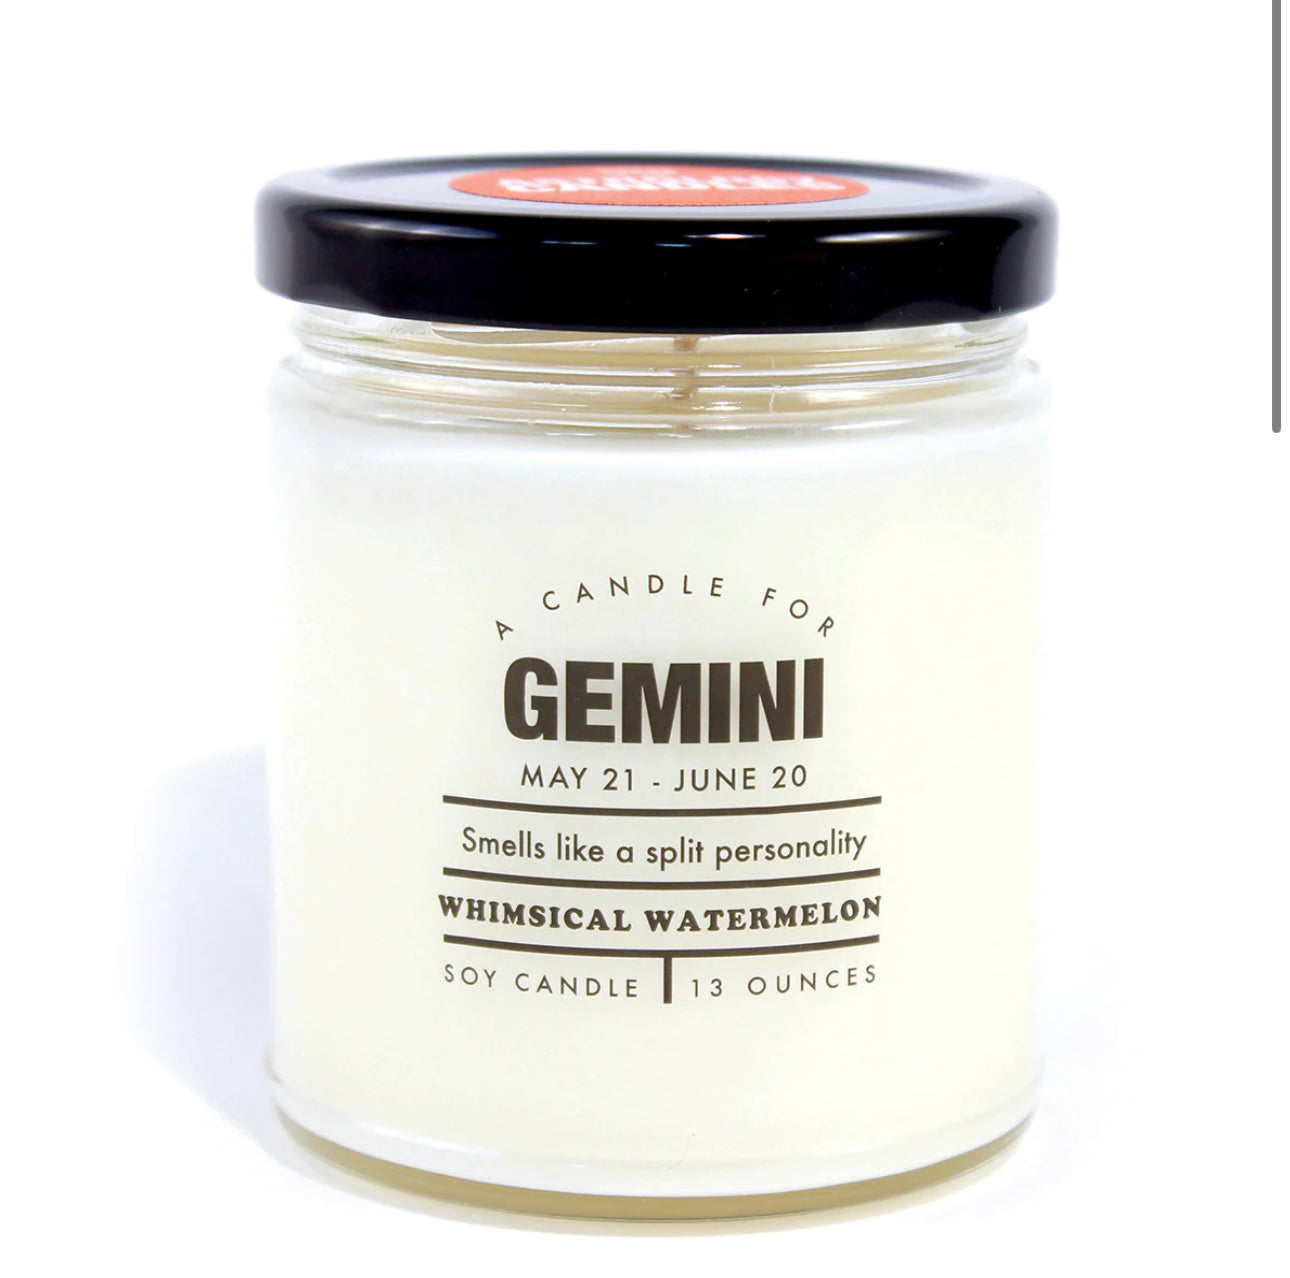 Whiskey River Astrology Candle Gemini